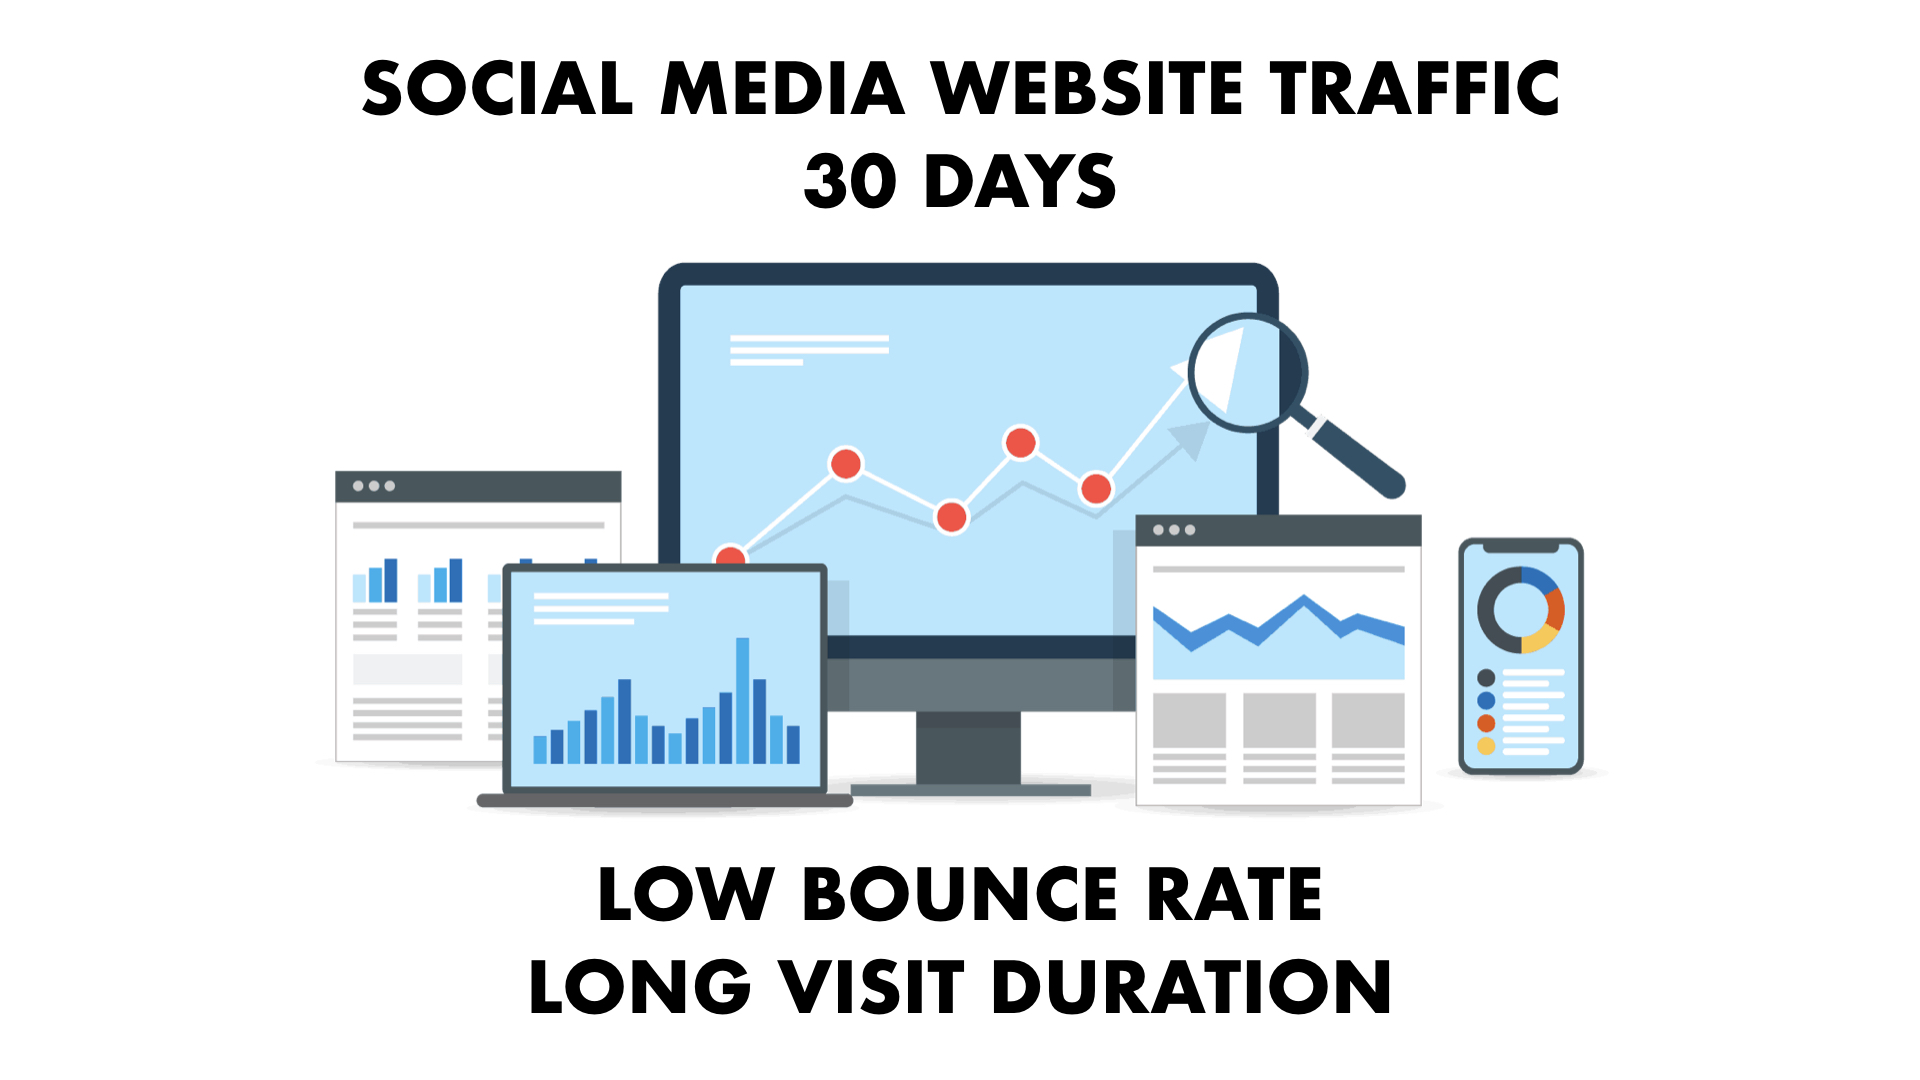 SOCIAL MEDIA Website Traffic with Low Bounce Rate and Long Visit Duration for 1 month